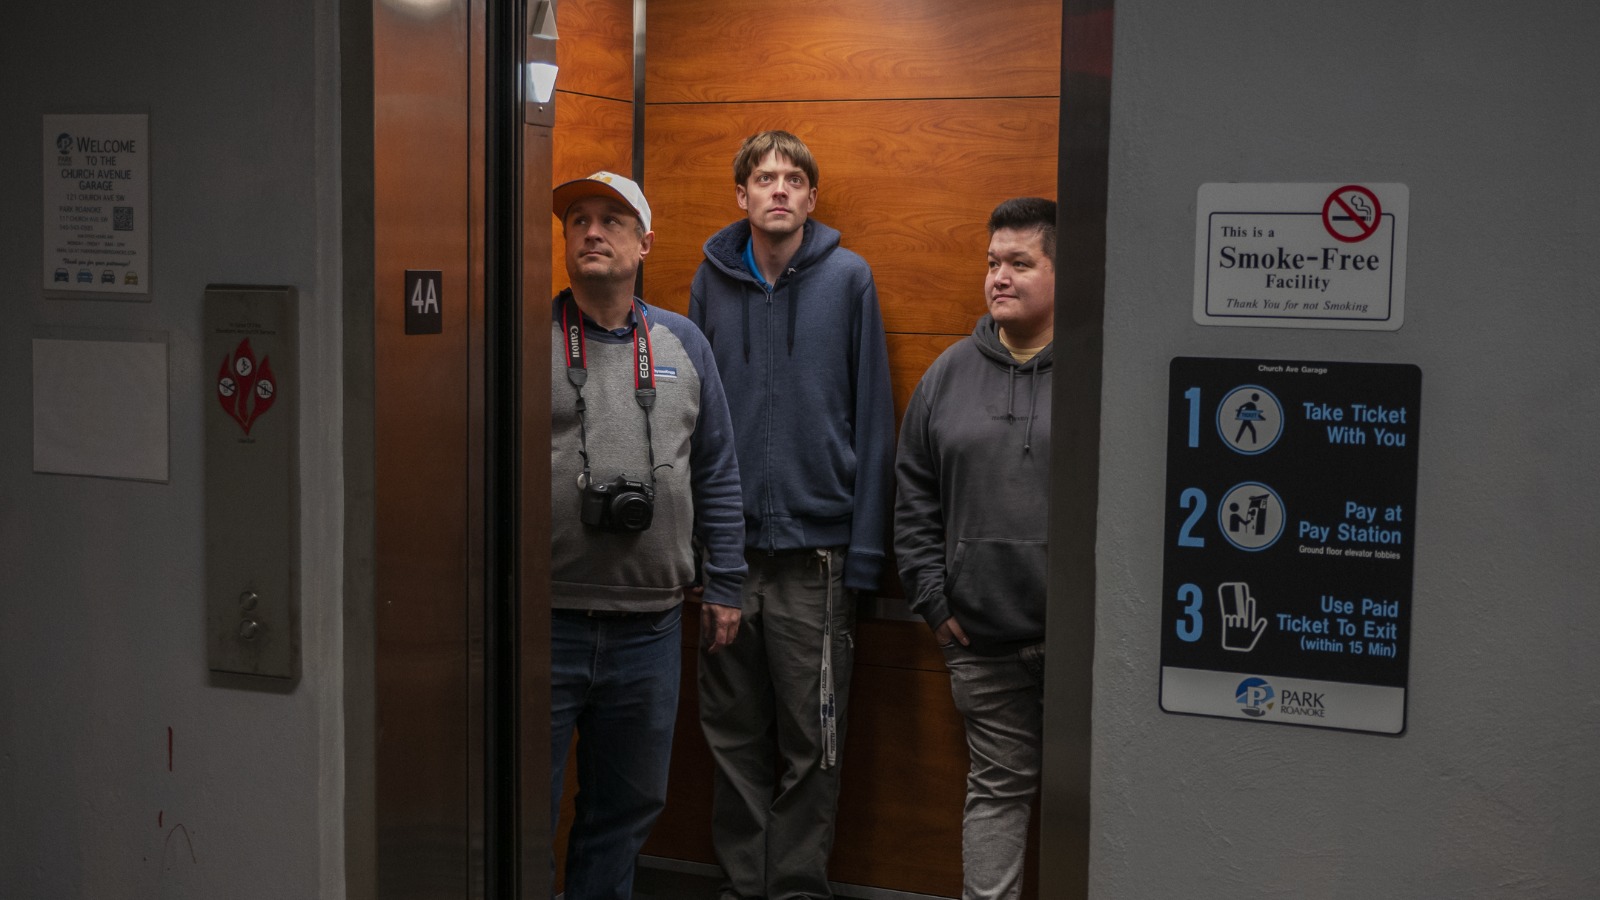 Still from documentary film Elevated, showing three men standing in an elevator which has its doors wide open